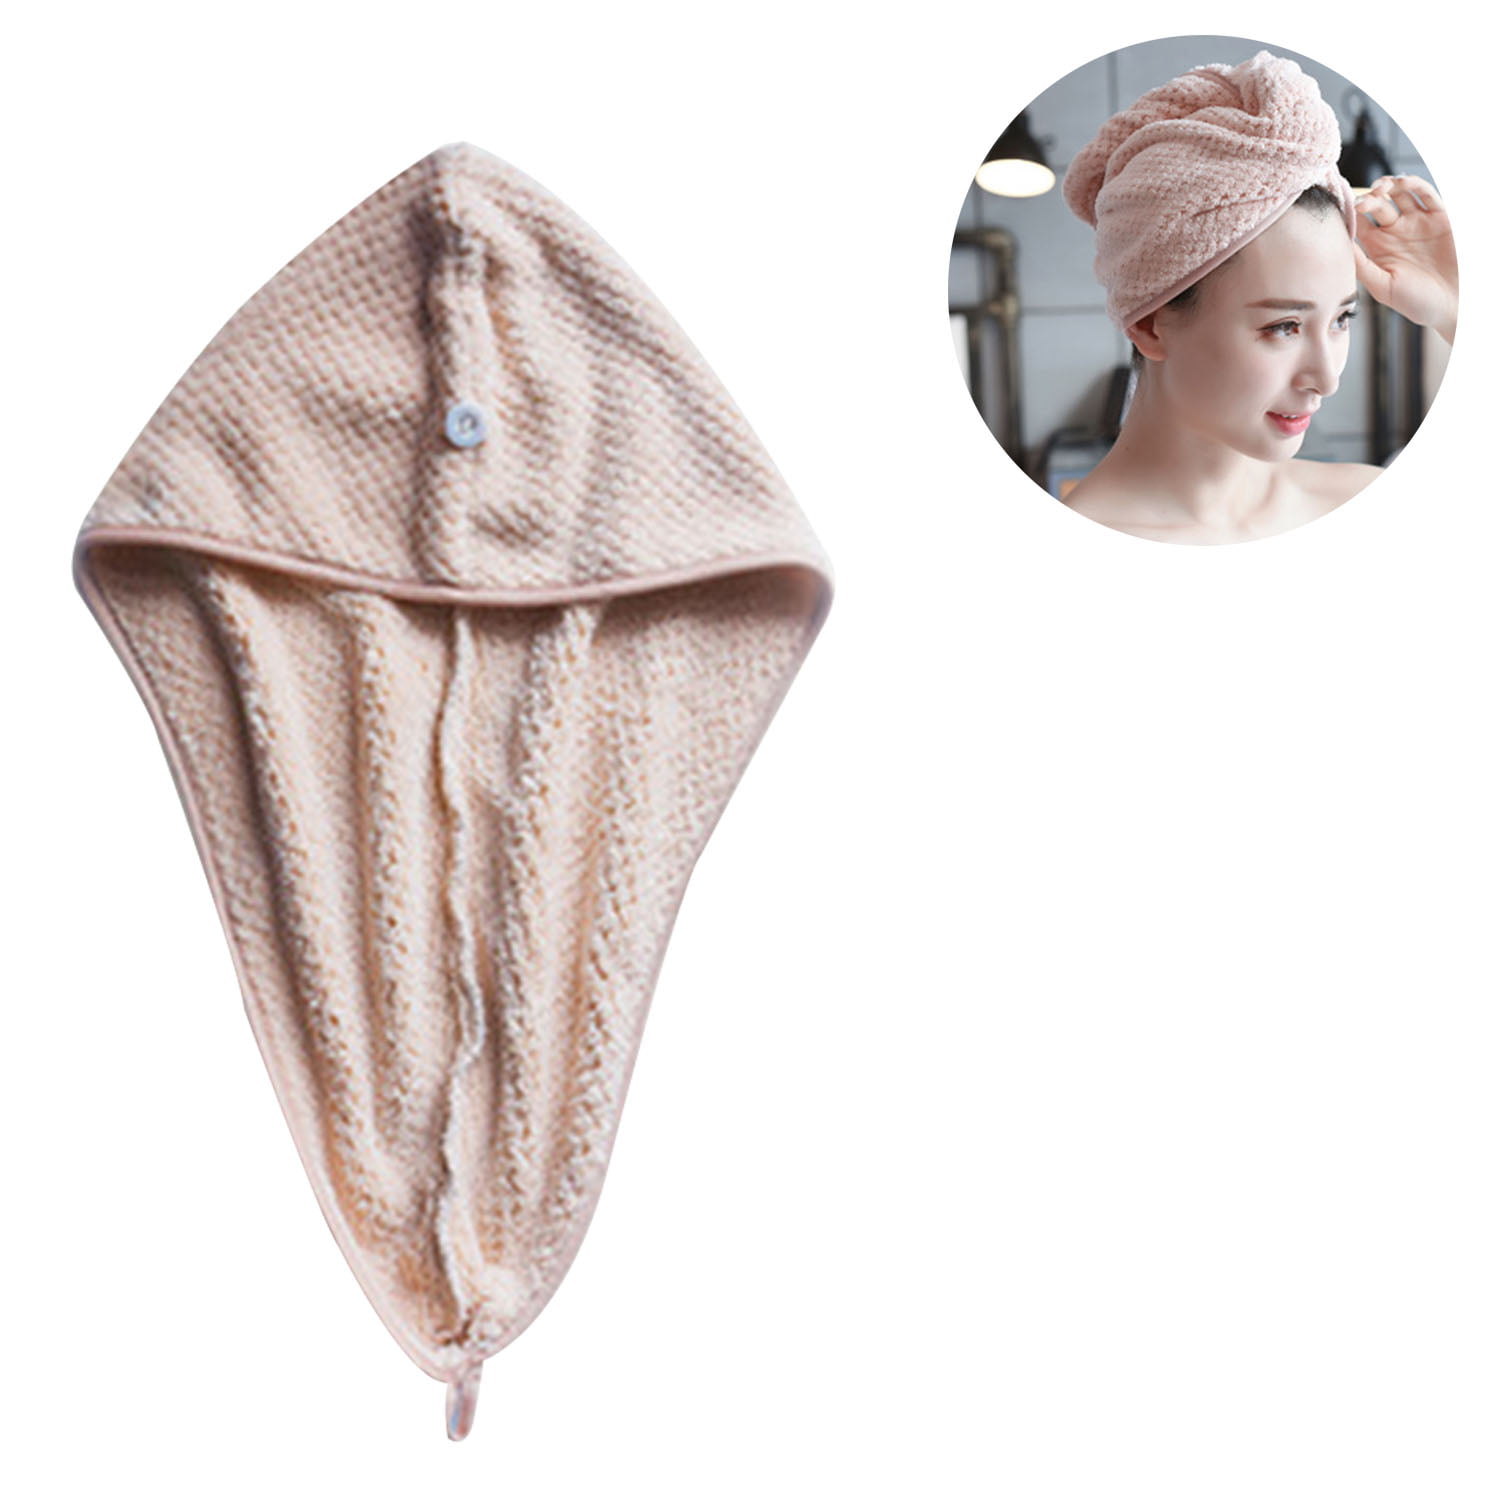 Hair Turban Towel Candy Pink 100/% Cotton Absorbent Soft Wrap with Loop /& Button